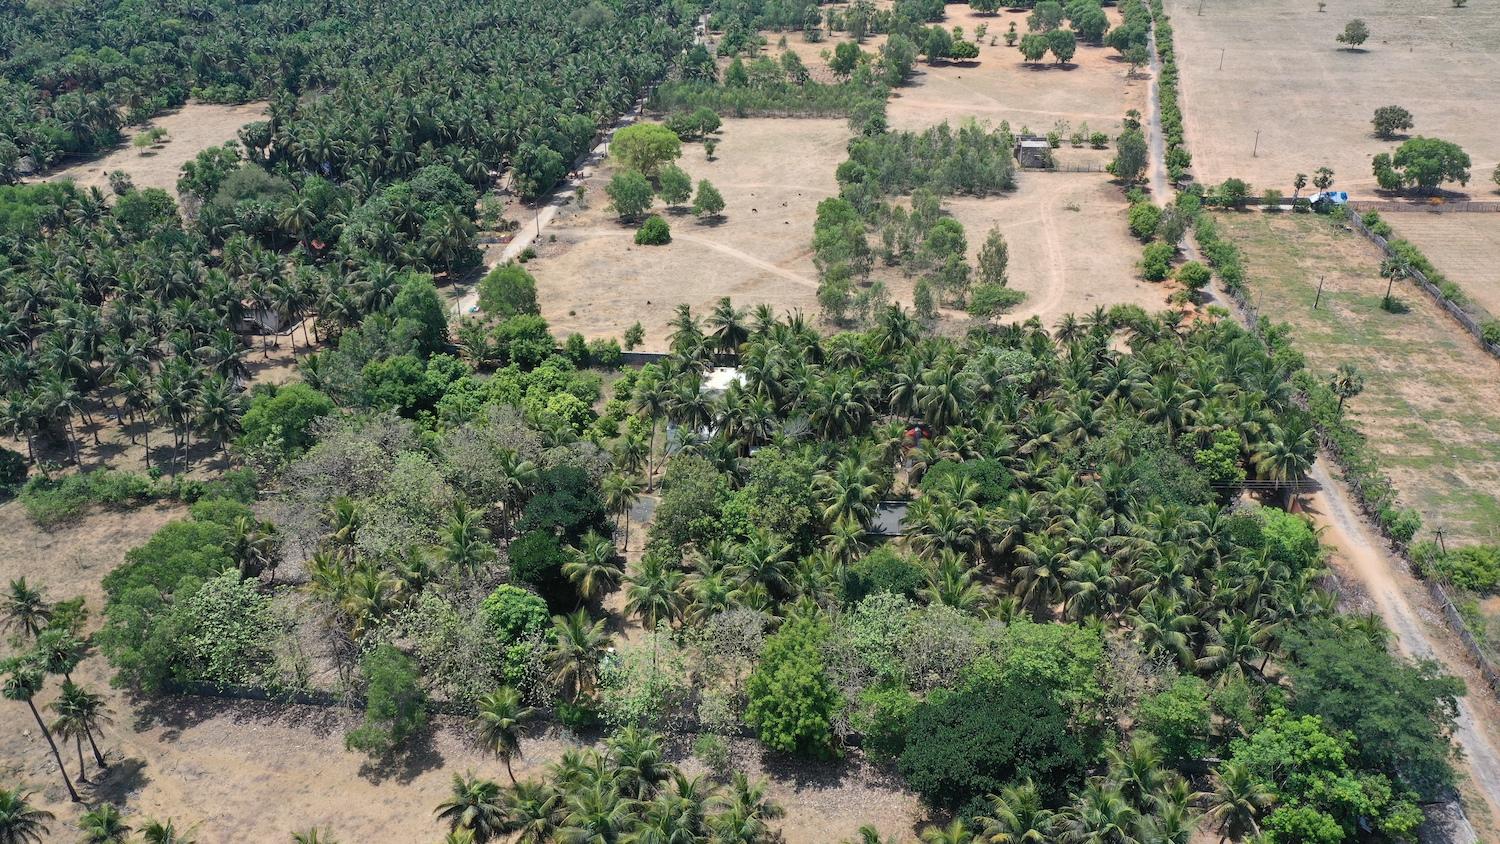 03 drone view side - Guest House with Tree Farm in Alapakkam - ECR